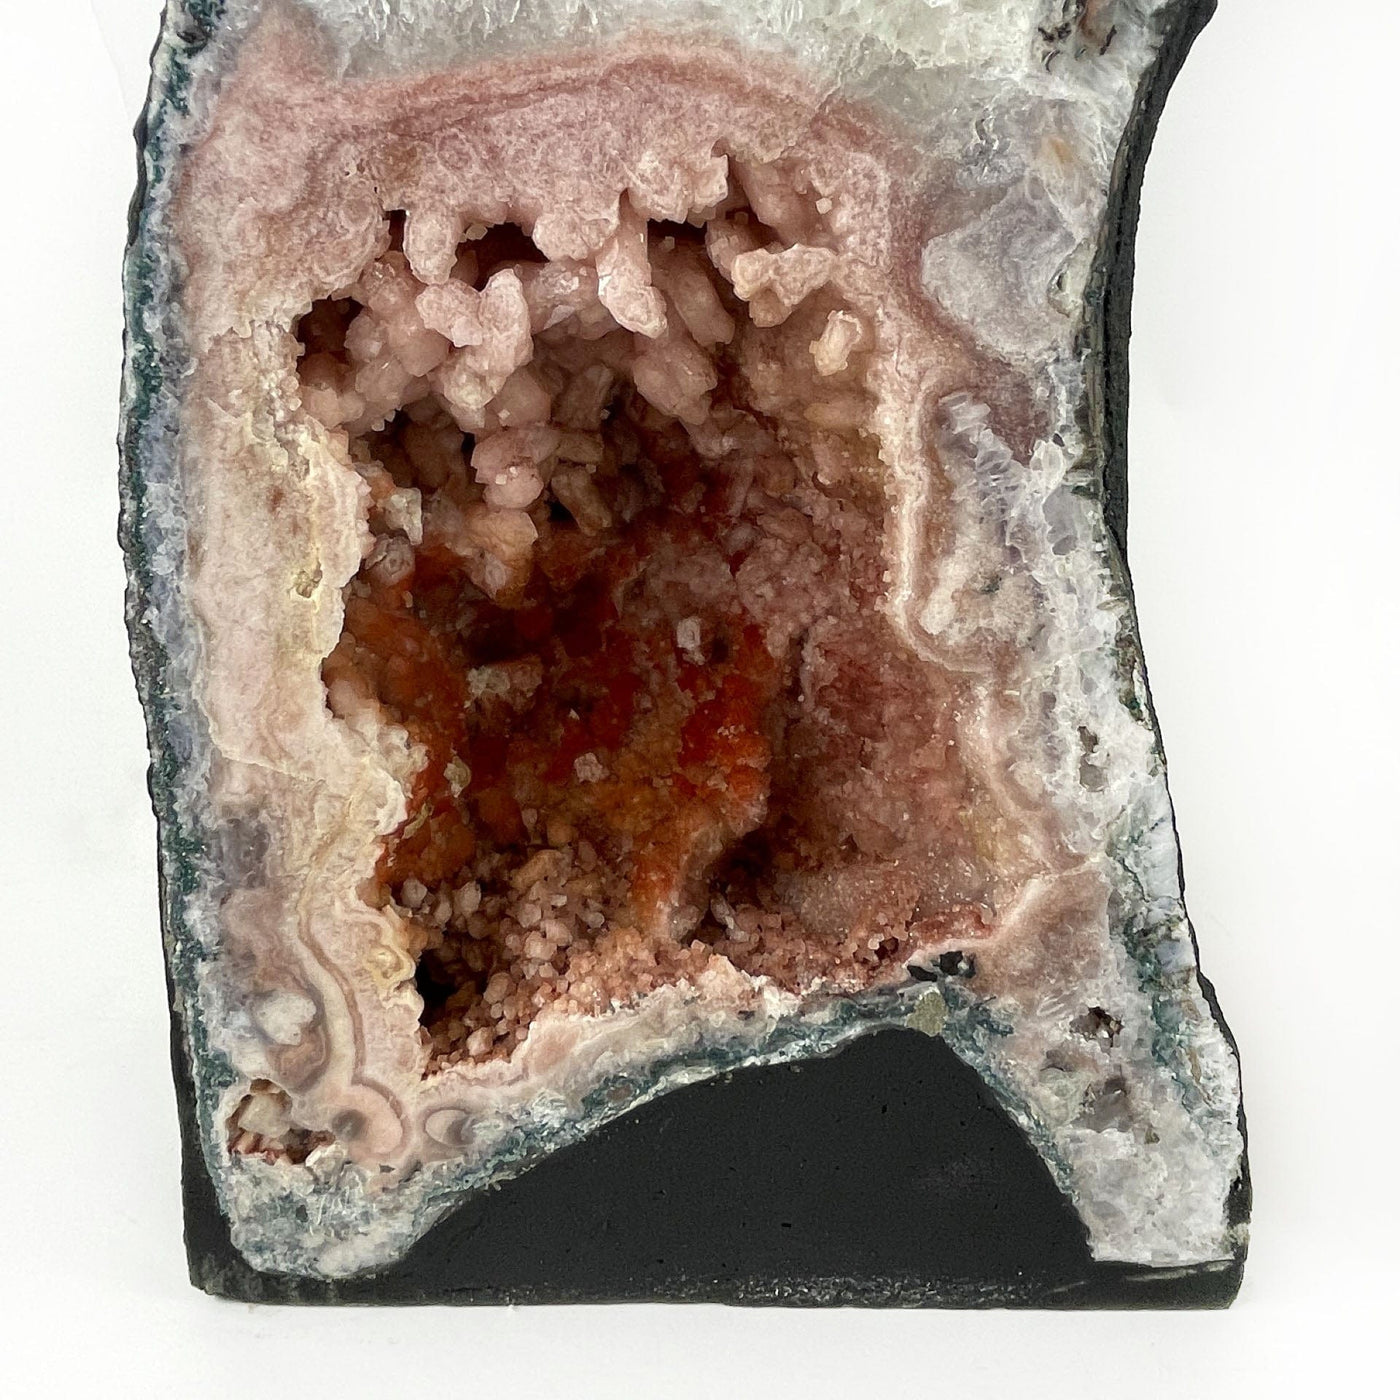 close up of one geode showing it has pink amethyst crystals and black base.